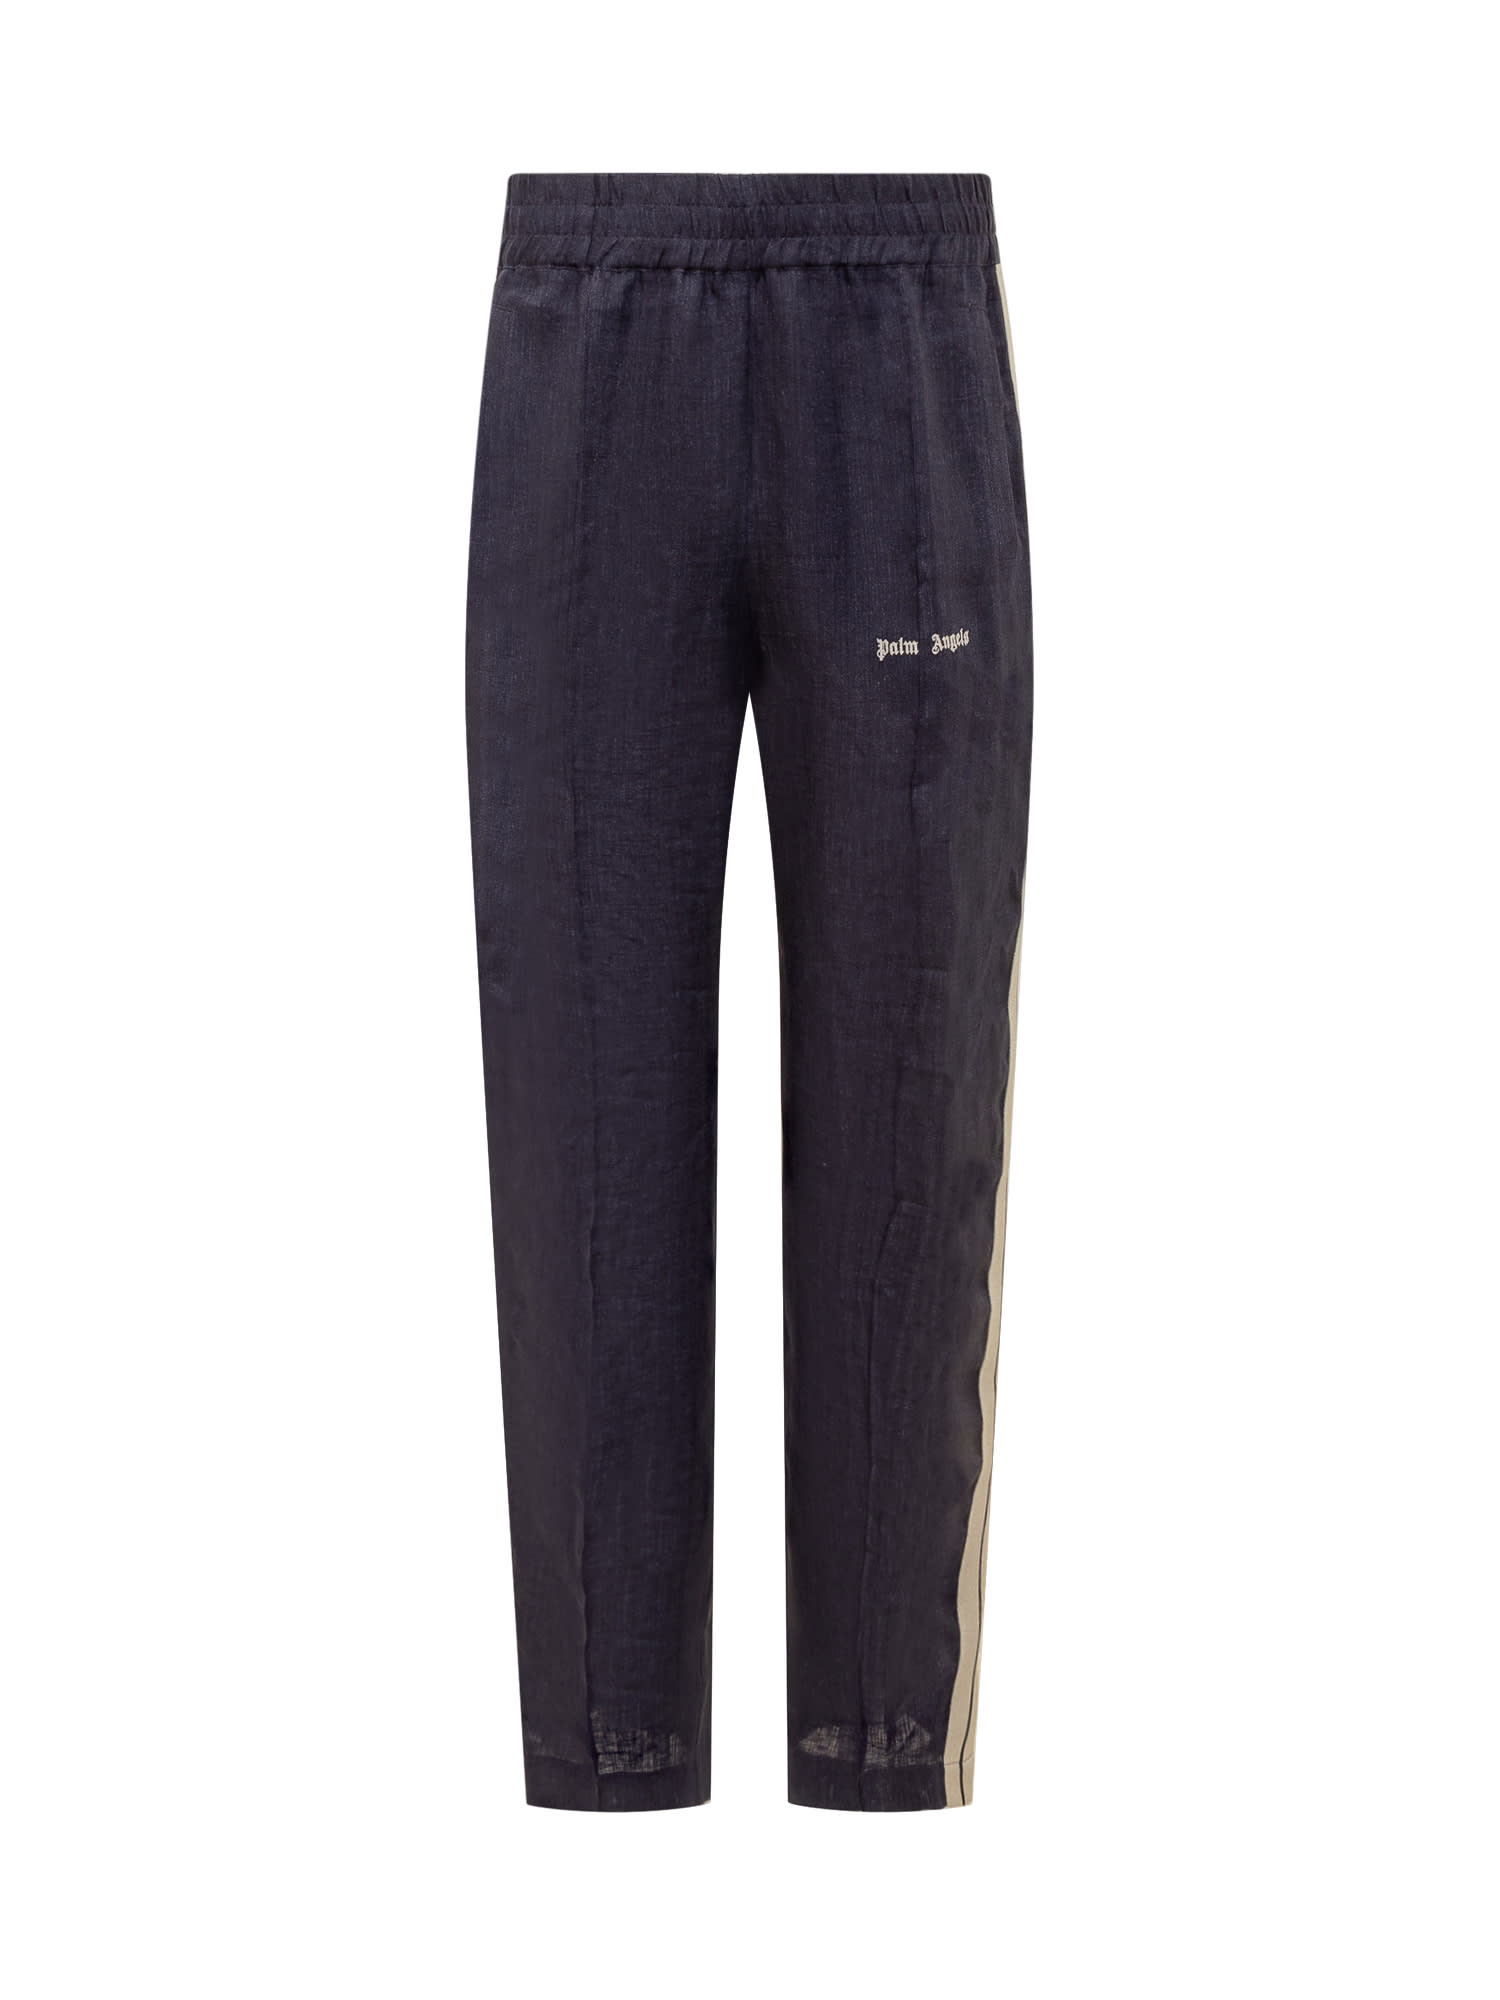 Palm Angels Linen Track Logo Pants In Navy Blue